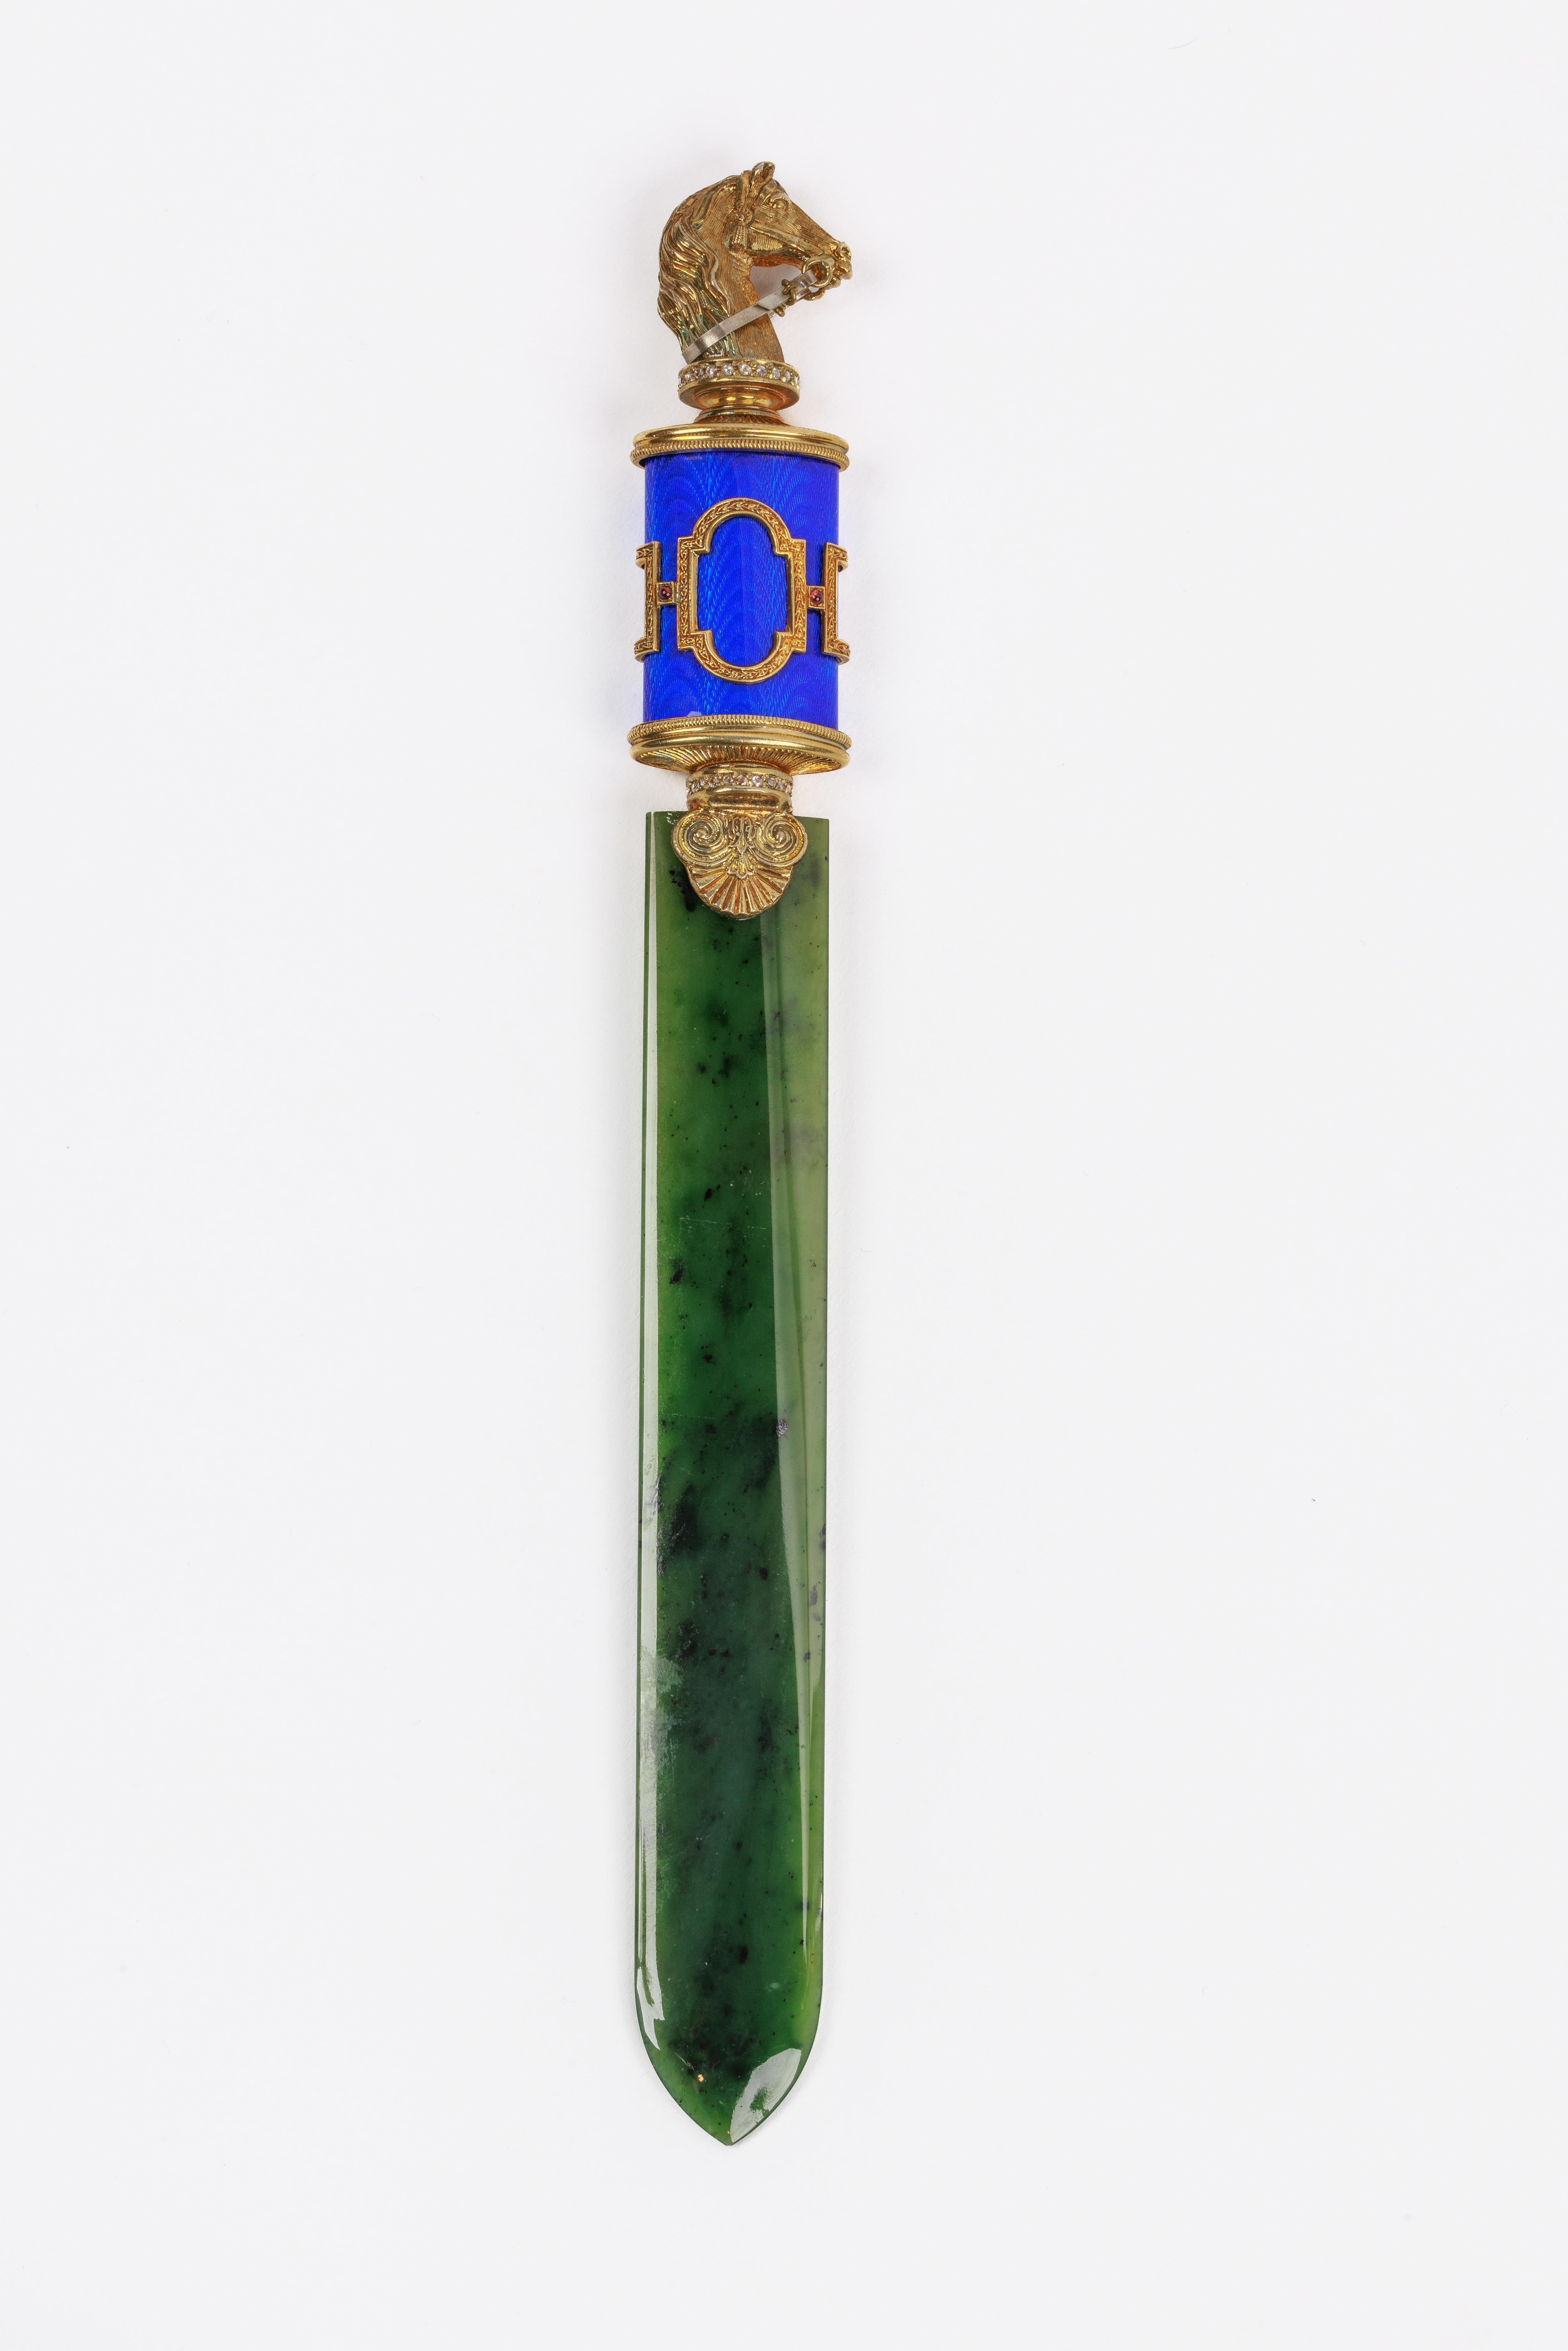 A Russian Silver-Gilt, Diamonds, Nephrite, and Blue Guilloche Enamel Letter Opener, with a horse head, in original fitted box.

Exquisite jewel like quality, in the Faberge style.

Measures 10